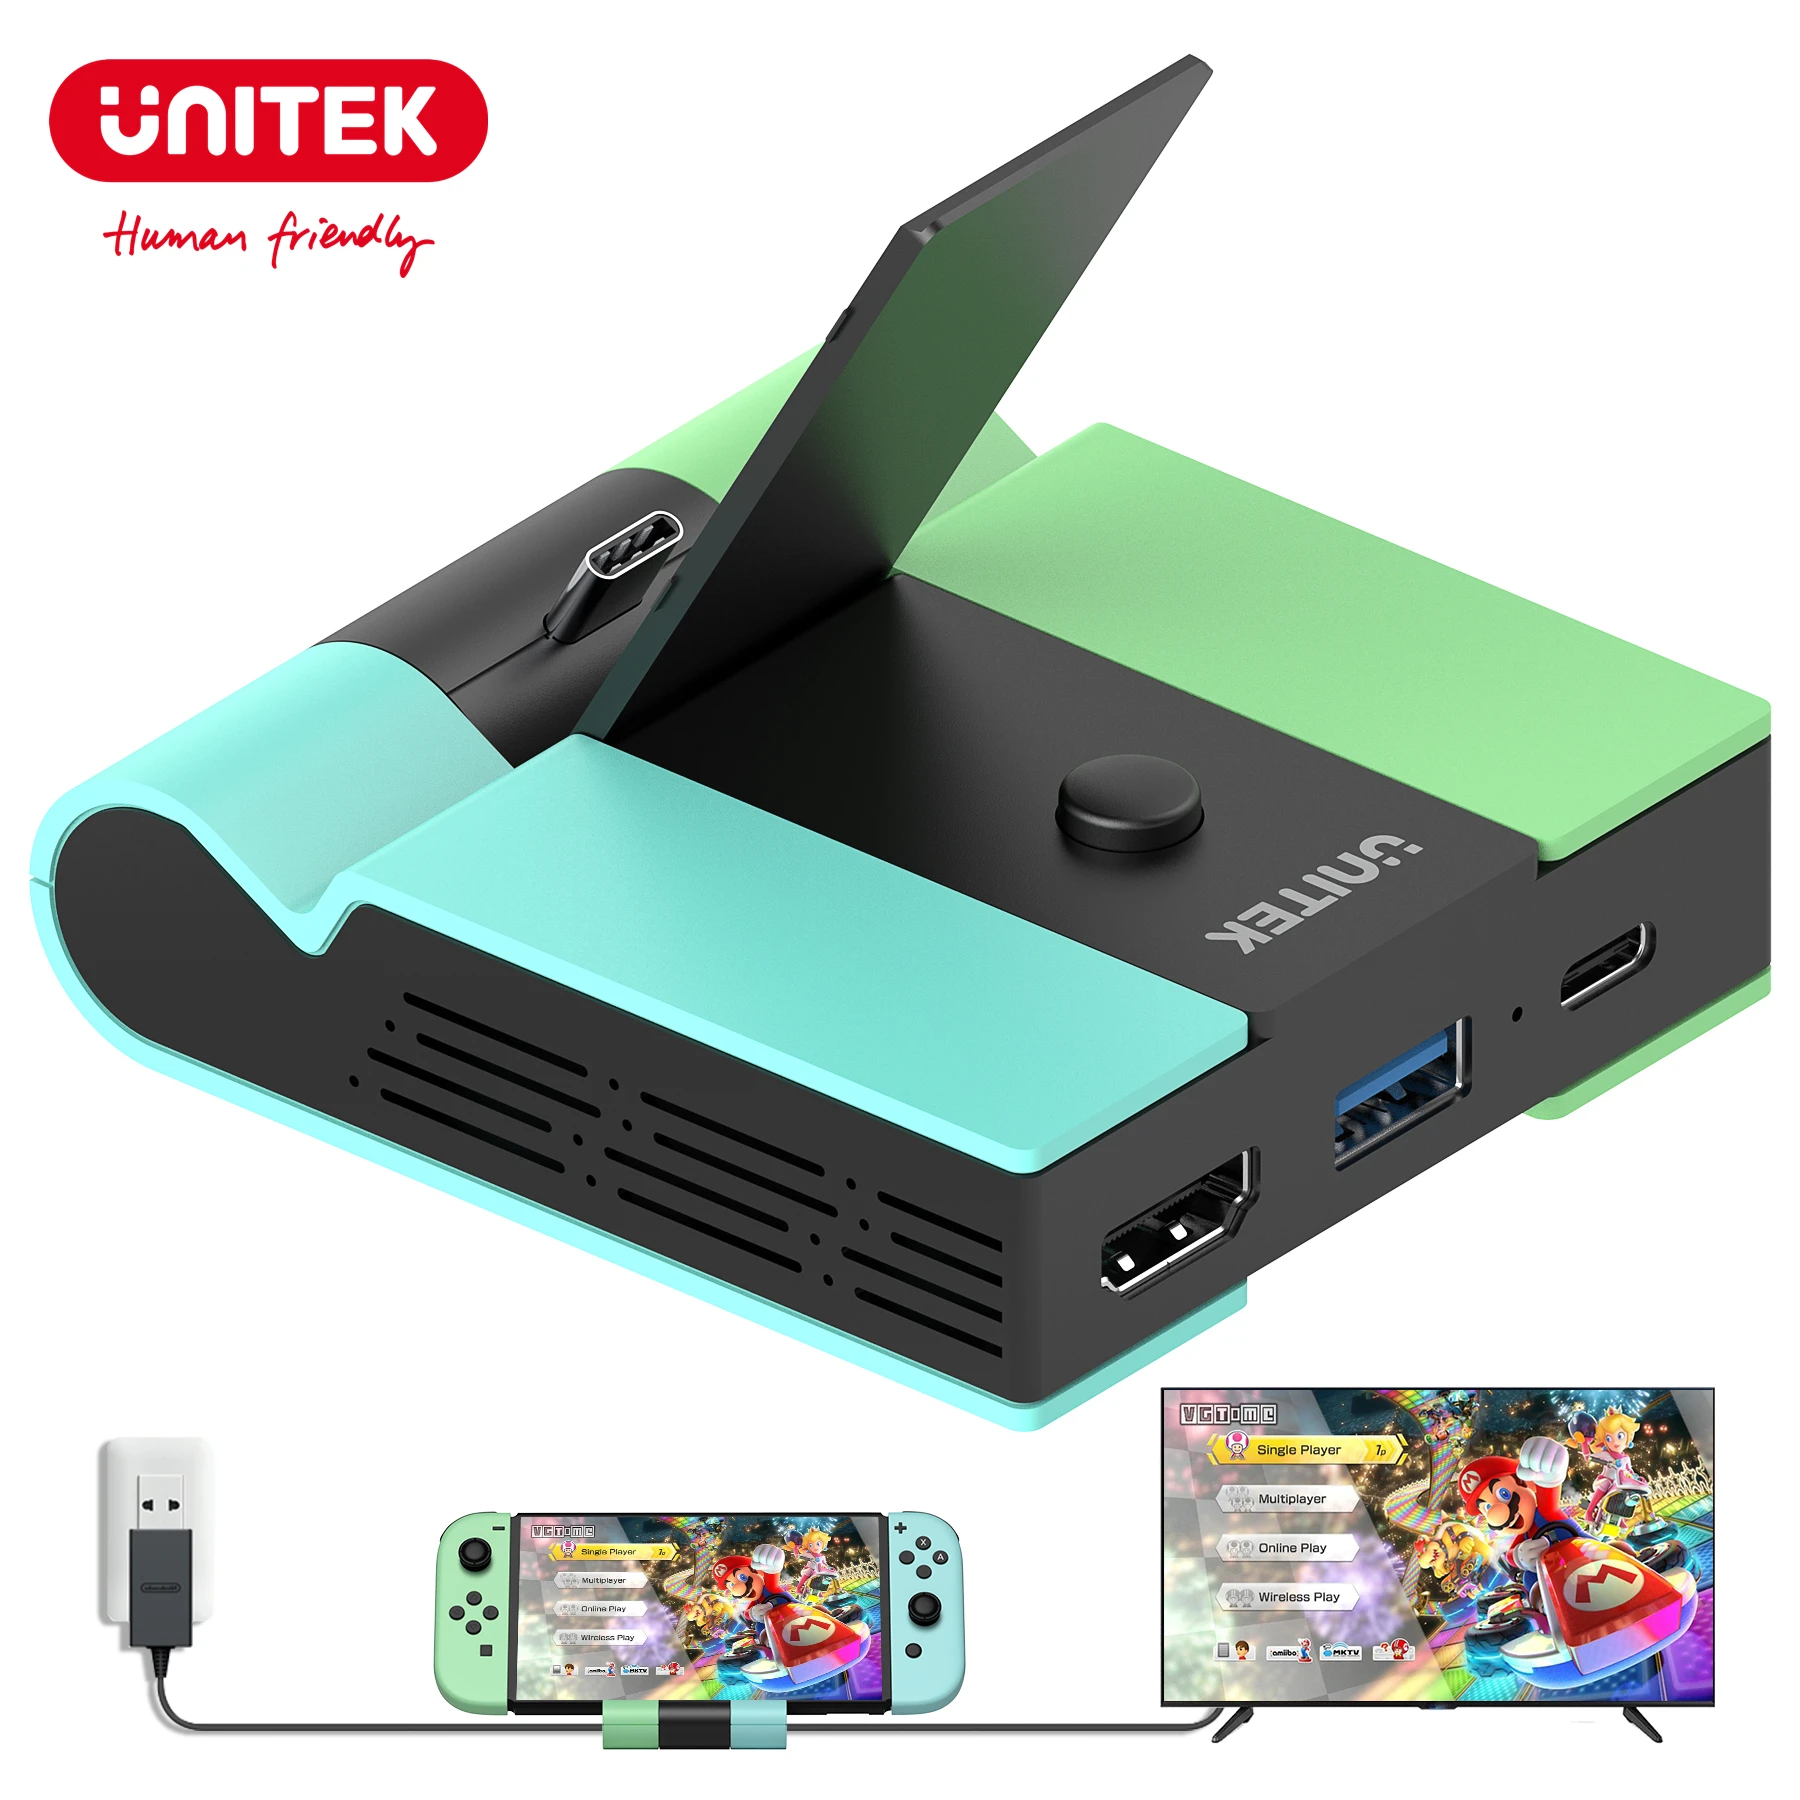 

Unitek Game Docking Station with 45W Type-C PD Charging 4K HDMI USB 3.0 for Nintendo Switch OLED Lite Gaming Dock HUB for TV